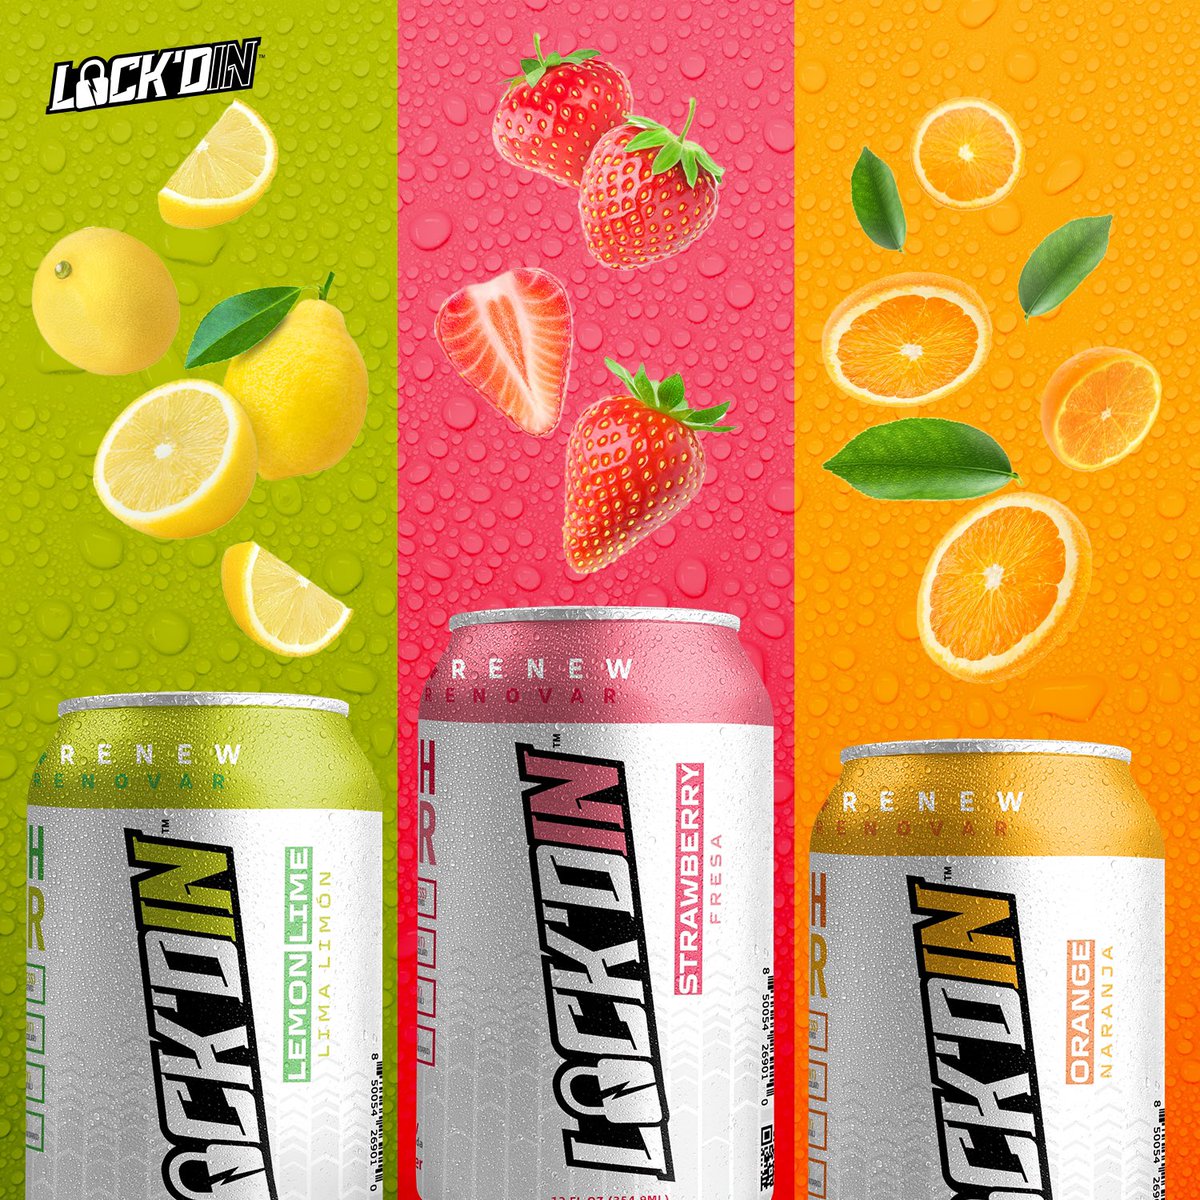 Kickstart your day with our flavored #LockdIn hydrogen water! 🍋🍓🍊

Discover the benefits of drinking hydrogen water each morning for improved metabolism, reduced inflammation, and enhanced cognitive function.🔒💧

📲Place your order today! LockdIn.com